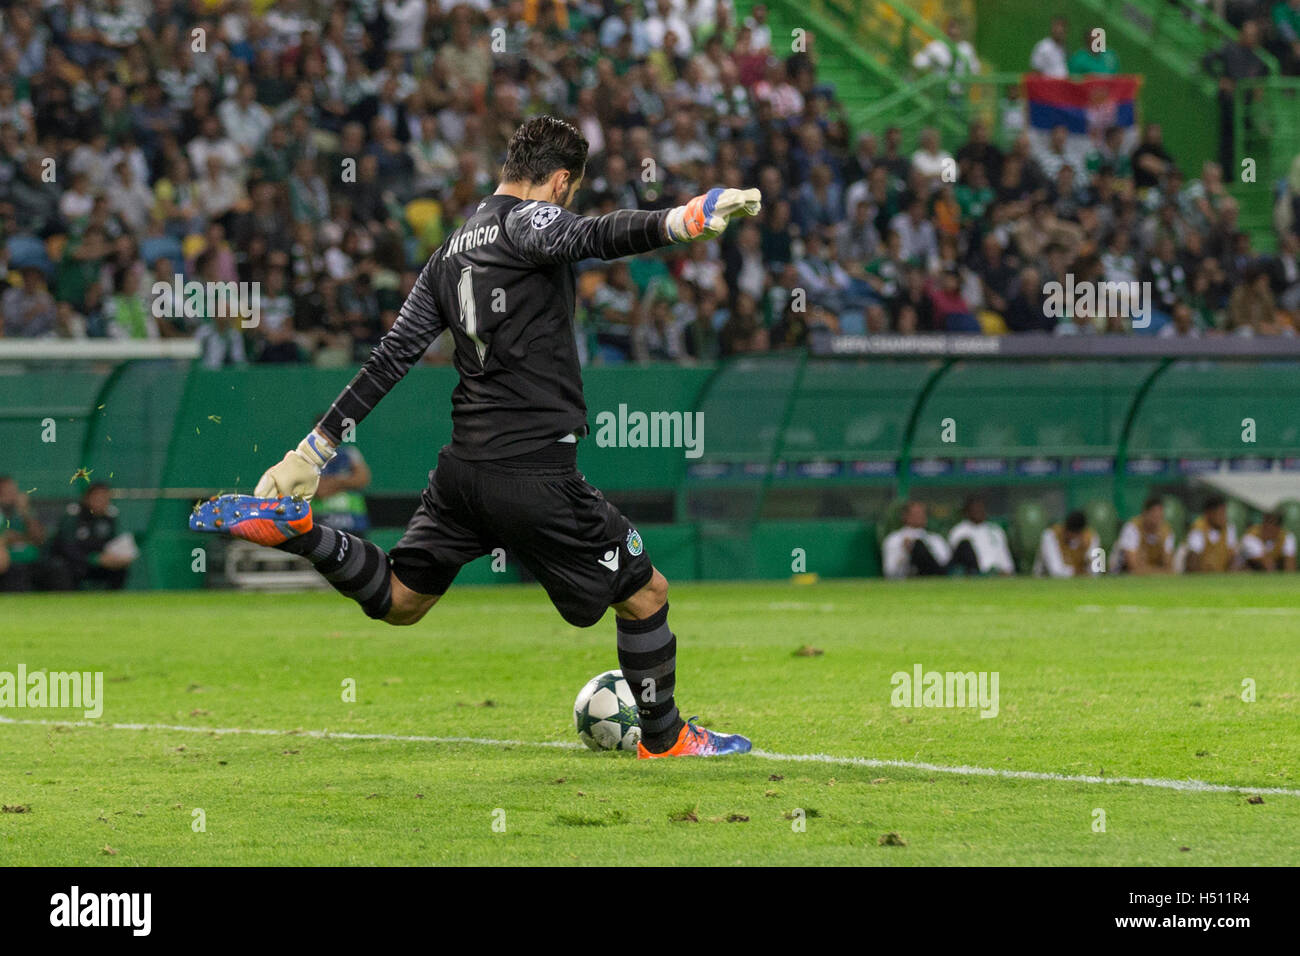 Lisbon, Portugal. 18th October, 2016. Sporting's Portuguese goalkeeper Rui Patricio (1) during the game of the UEFA Champions League, Group B, Sporting CP vs Borussia Dortmund Credit:  Alexandre de Sousa/Alamy Live News Stock Photo